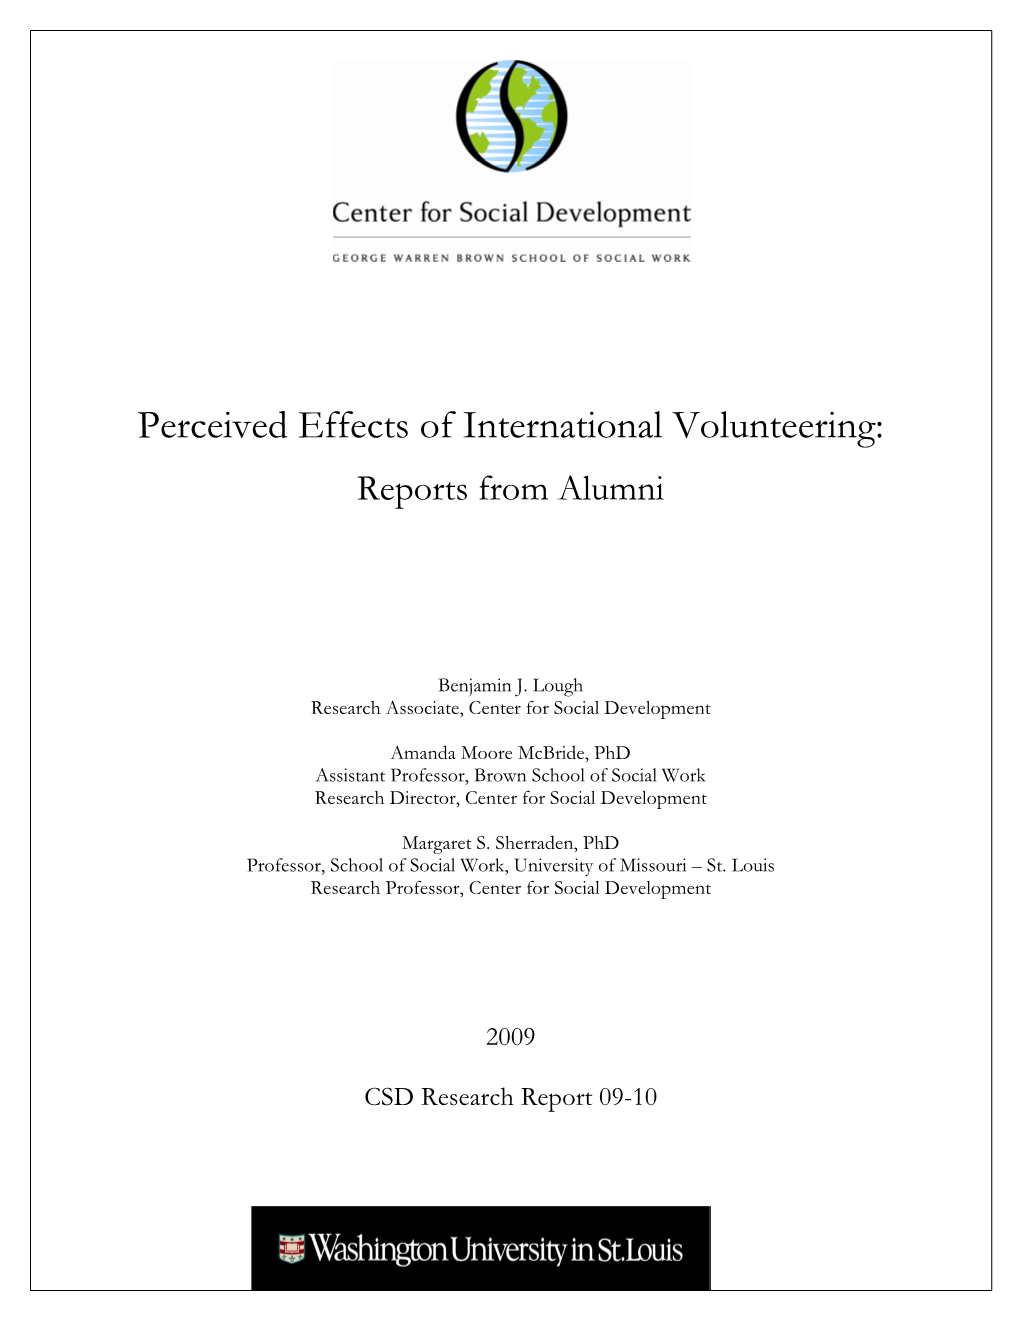 Perceived Effects of International Volunteering: Reports from Alumni